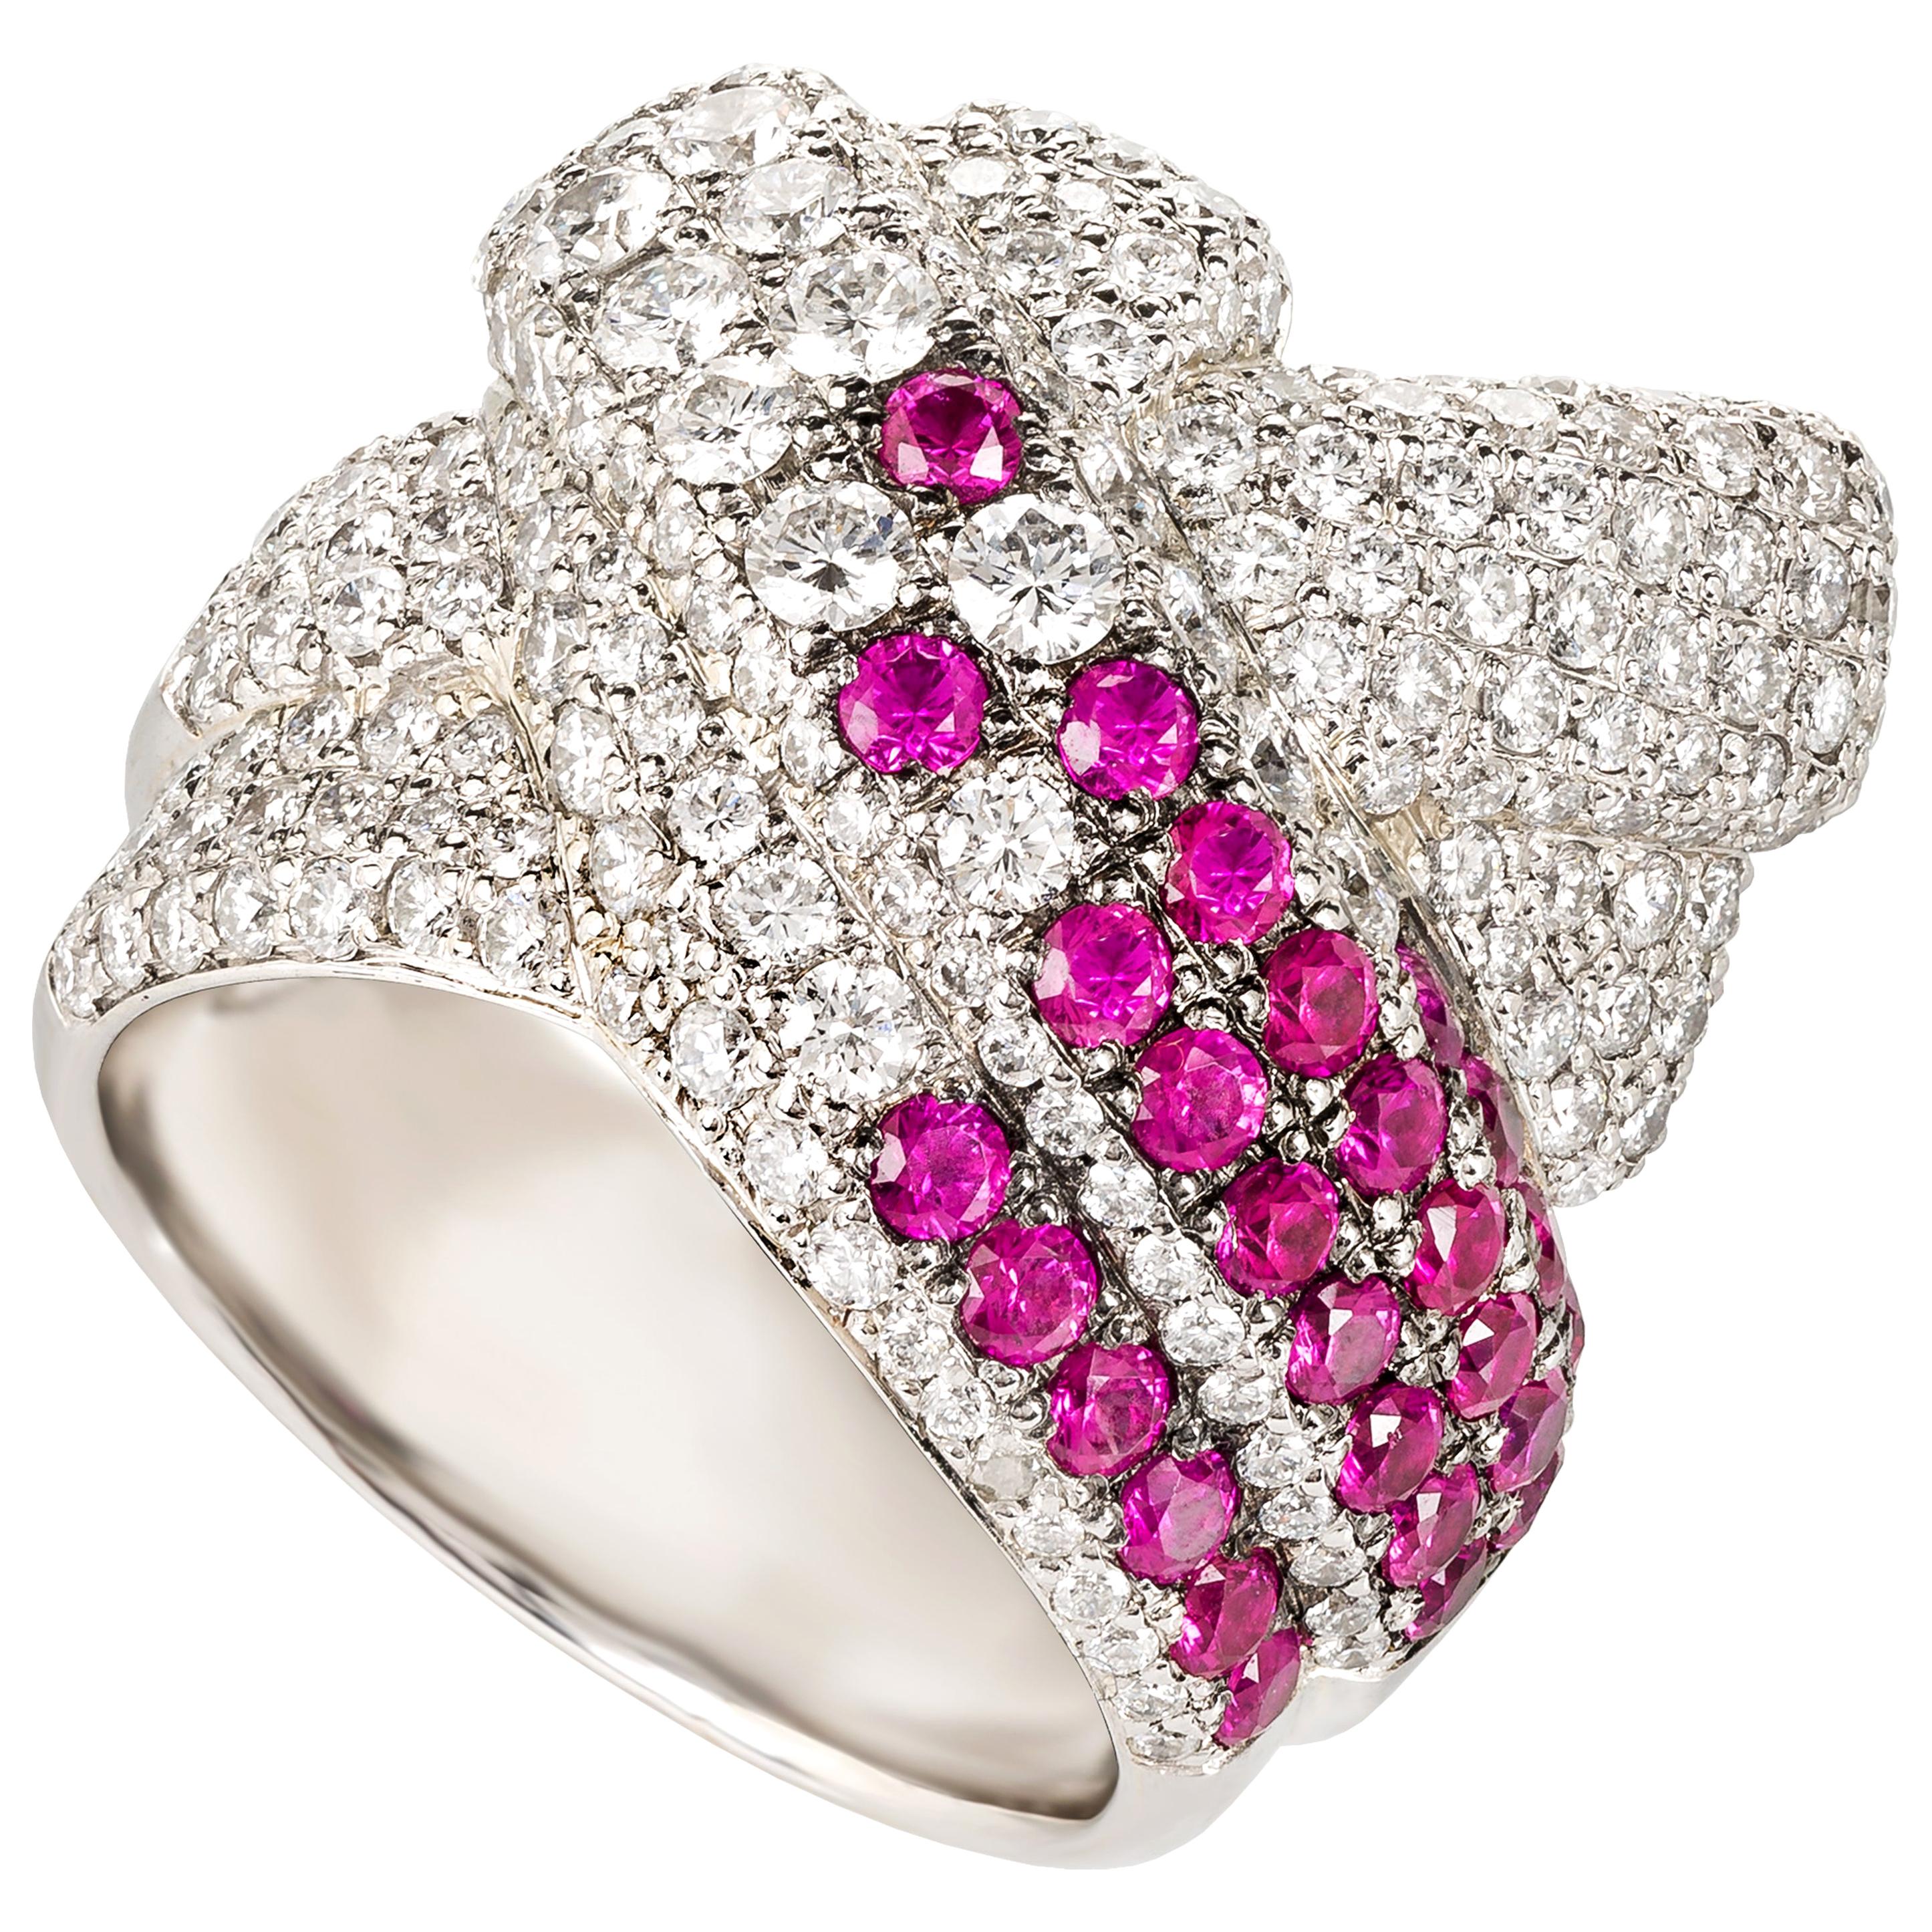 Rosior one-off Diamond and Ruby Cocktail Ring set in 950 Platinum For Sale